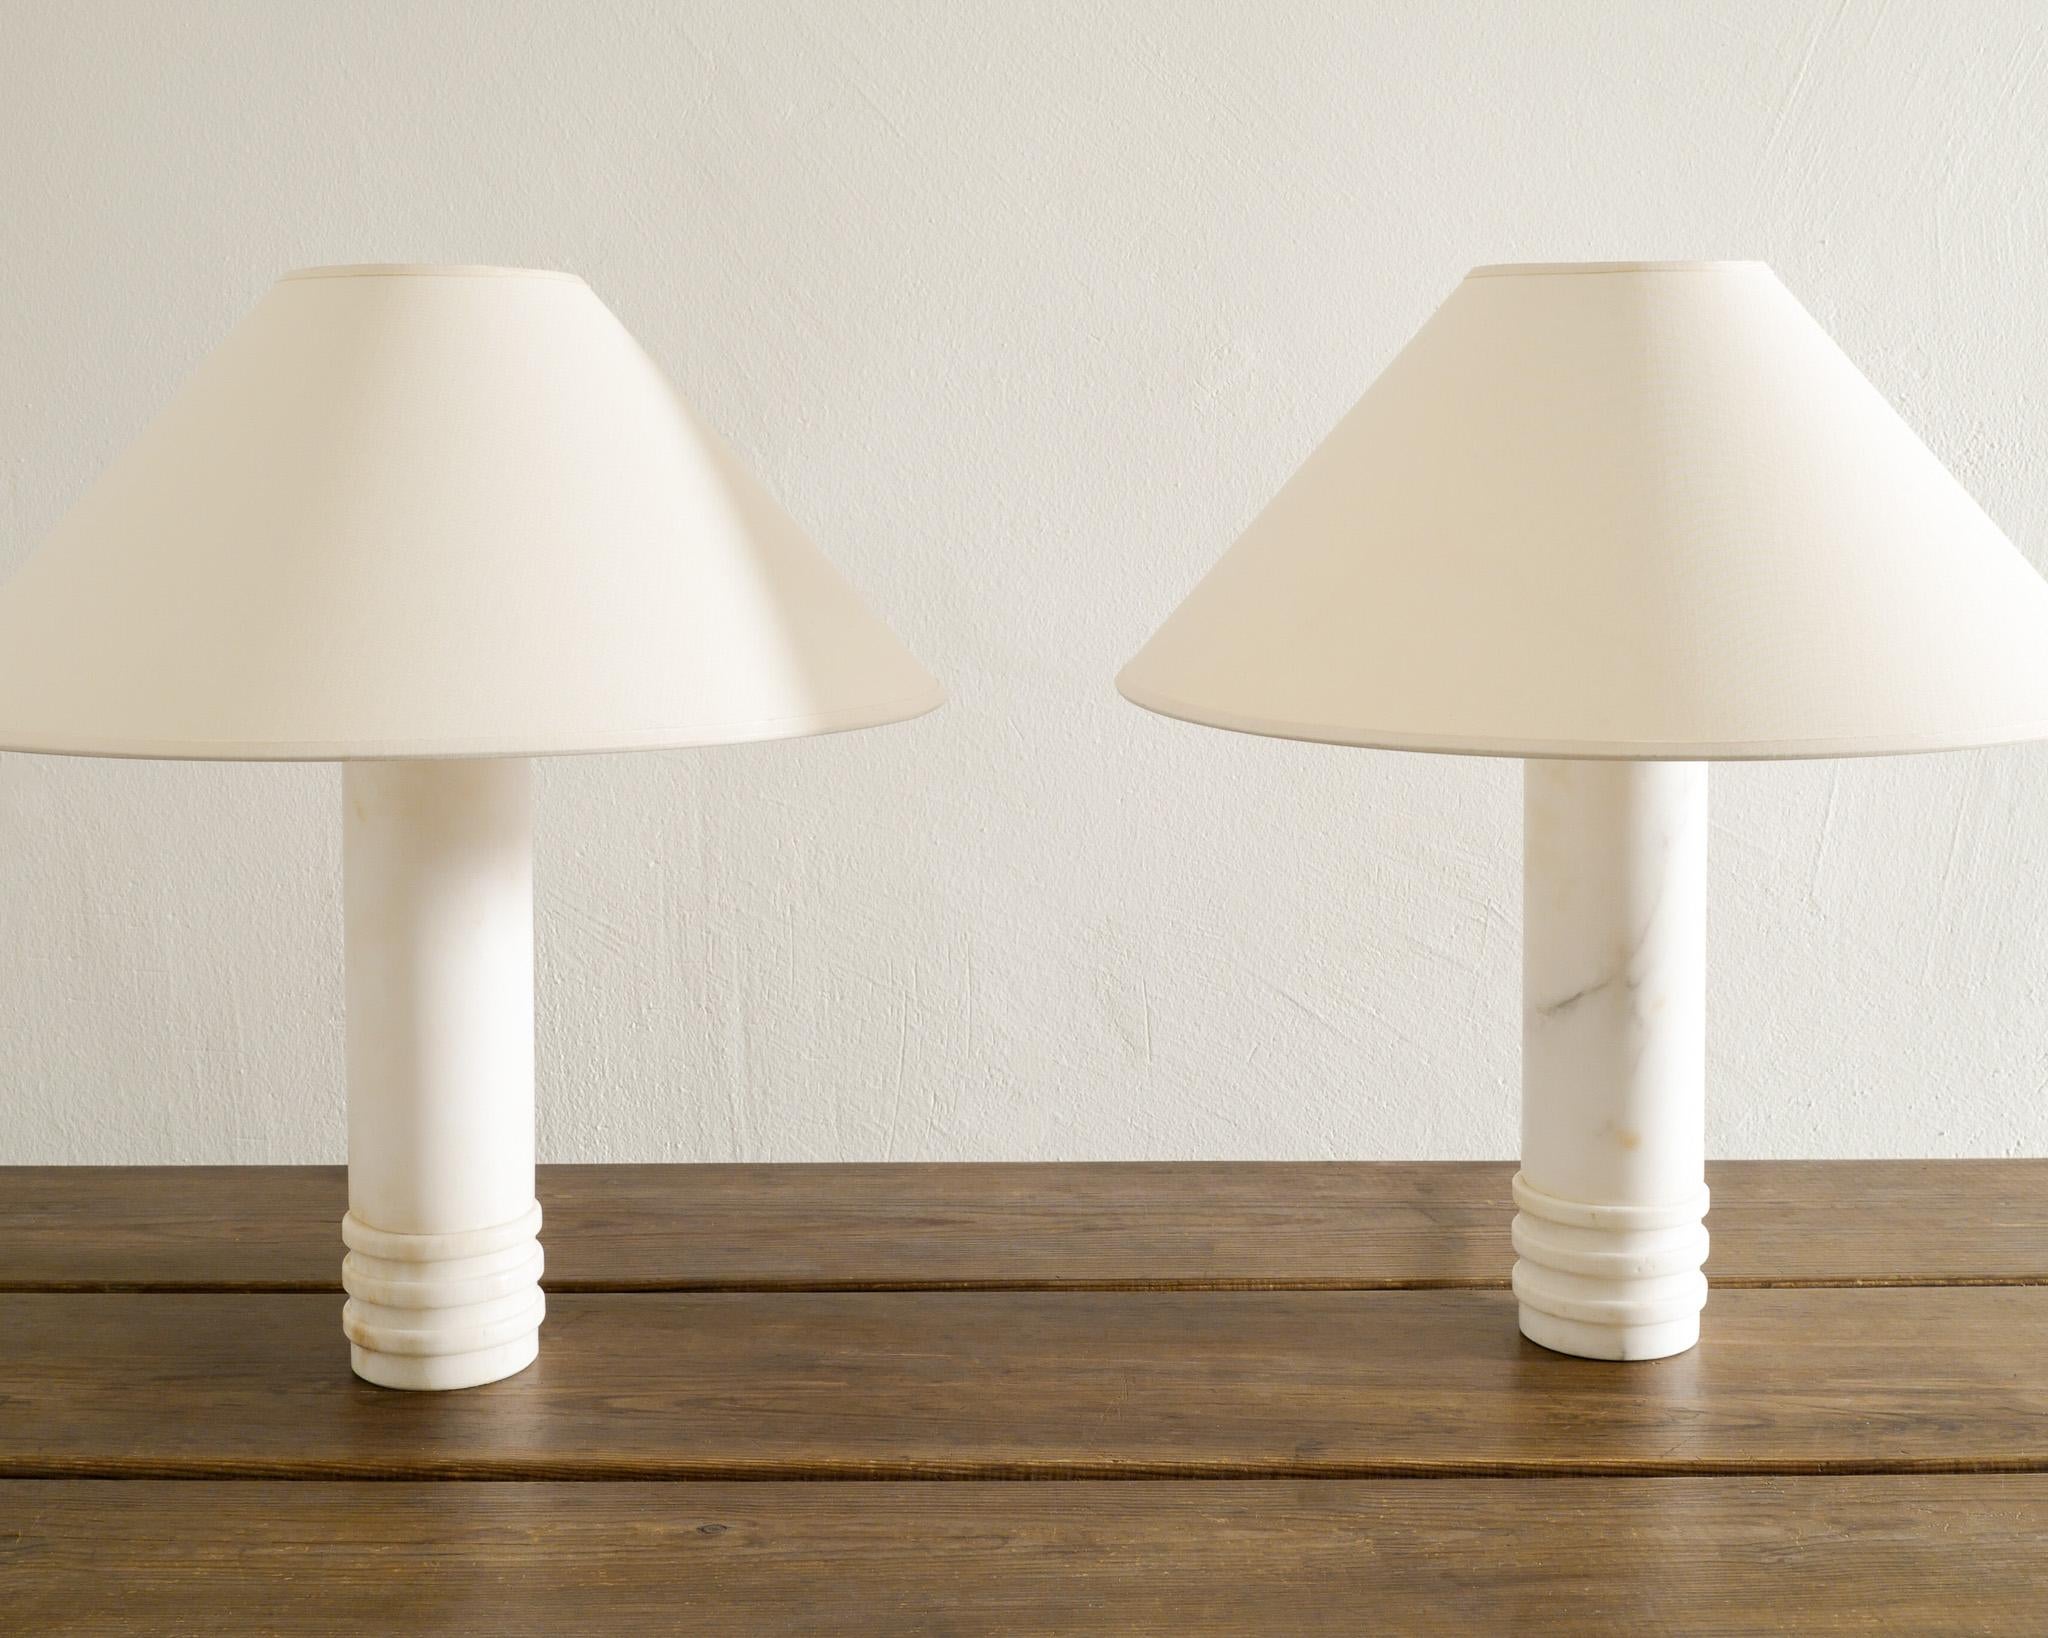 Rare pair of Swedish mid century cylinder table / bed lamps in solid white  marble produced by Bergboms Sweden 1960s. In good original condition with newer wiring. Signed. 

Dimensions: H: 34 cm / 13.4